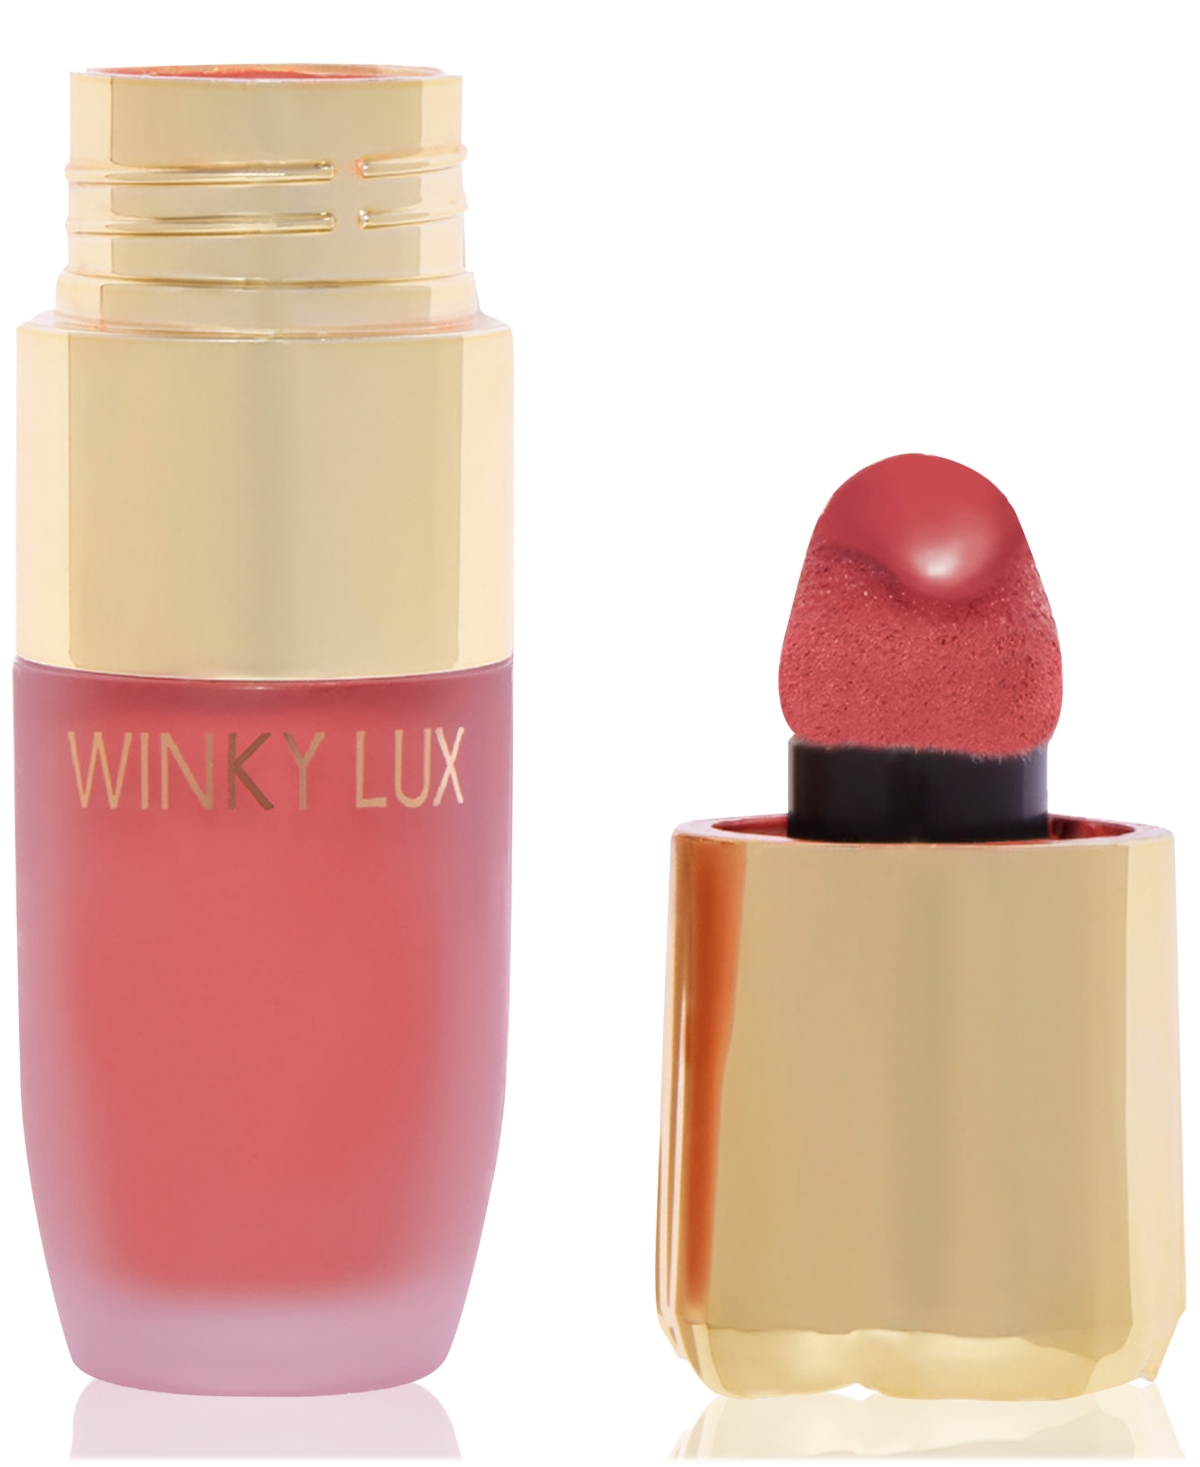 Winky Lux Cheeky Rose Liquid Blush In Queen